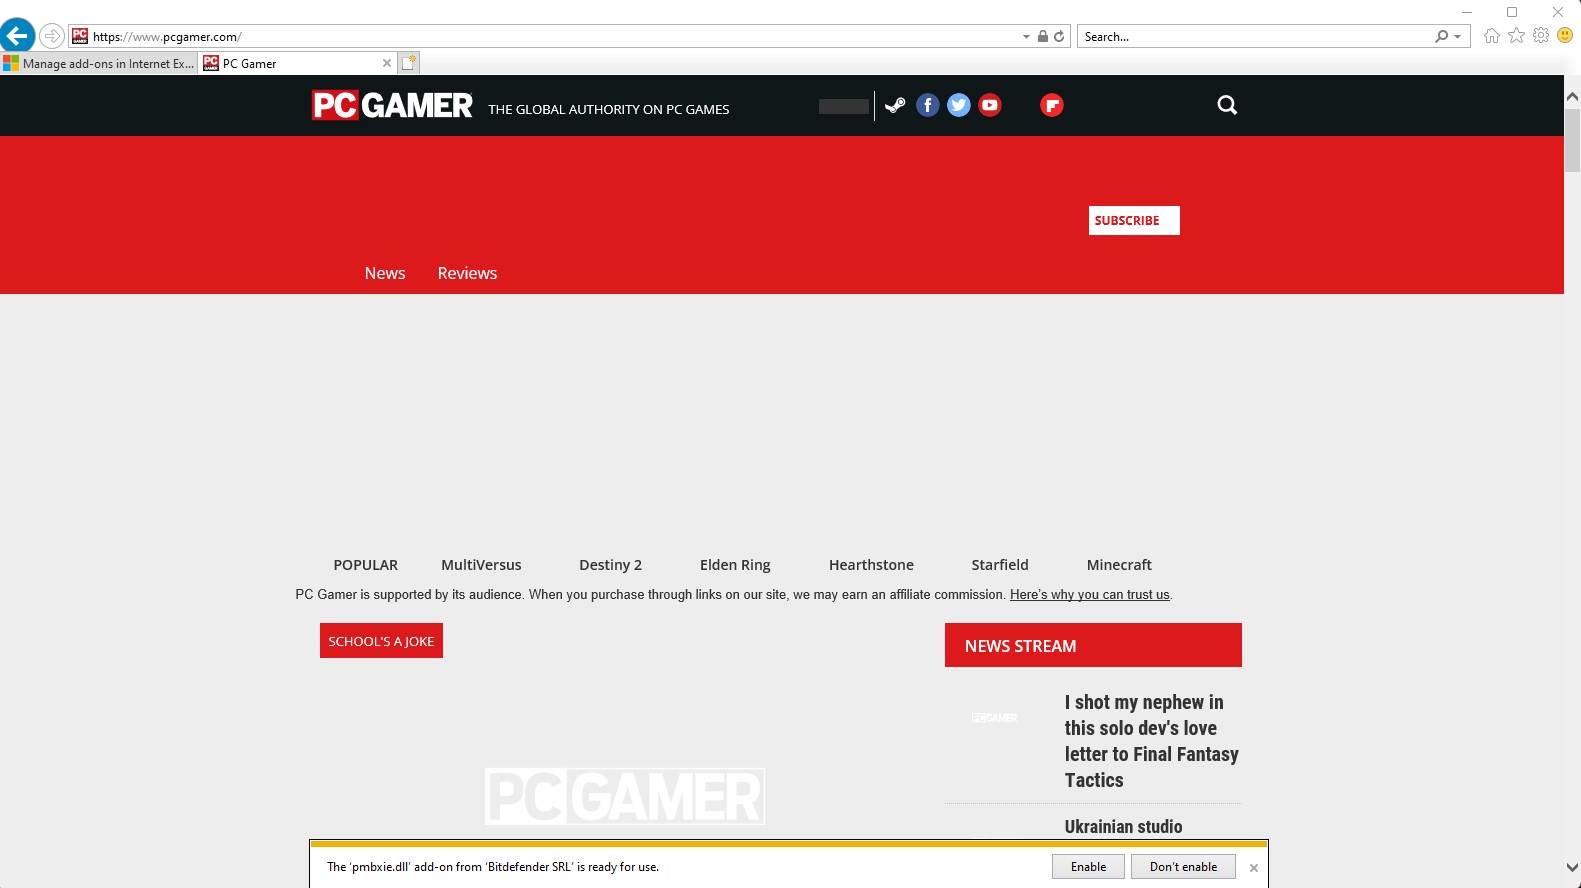 PC Gamer's home page on 8/4/22, lacking images and functionality through internet explorer